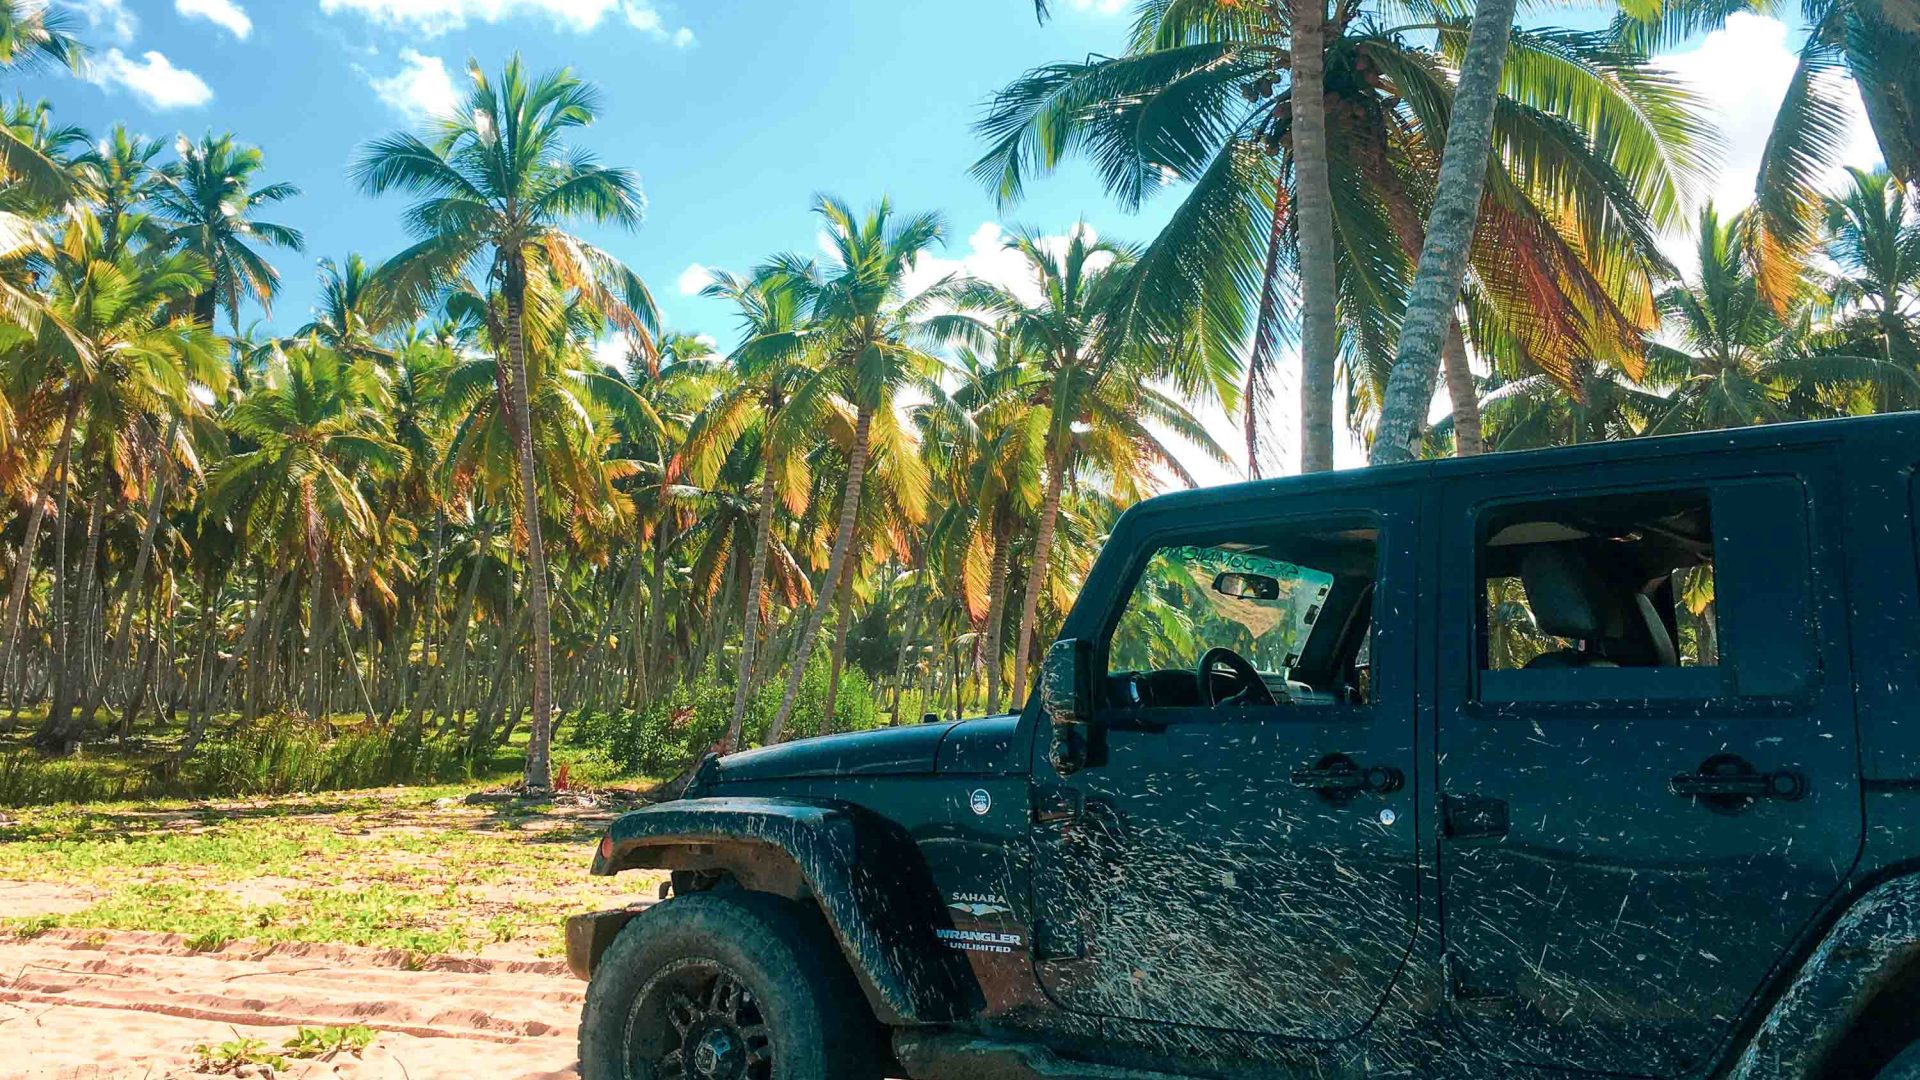 A jeep drives past palm trees on a dirt road.